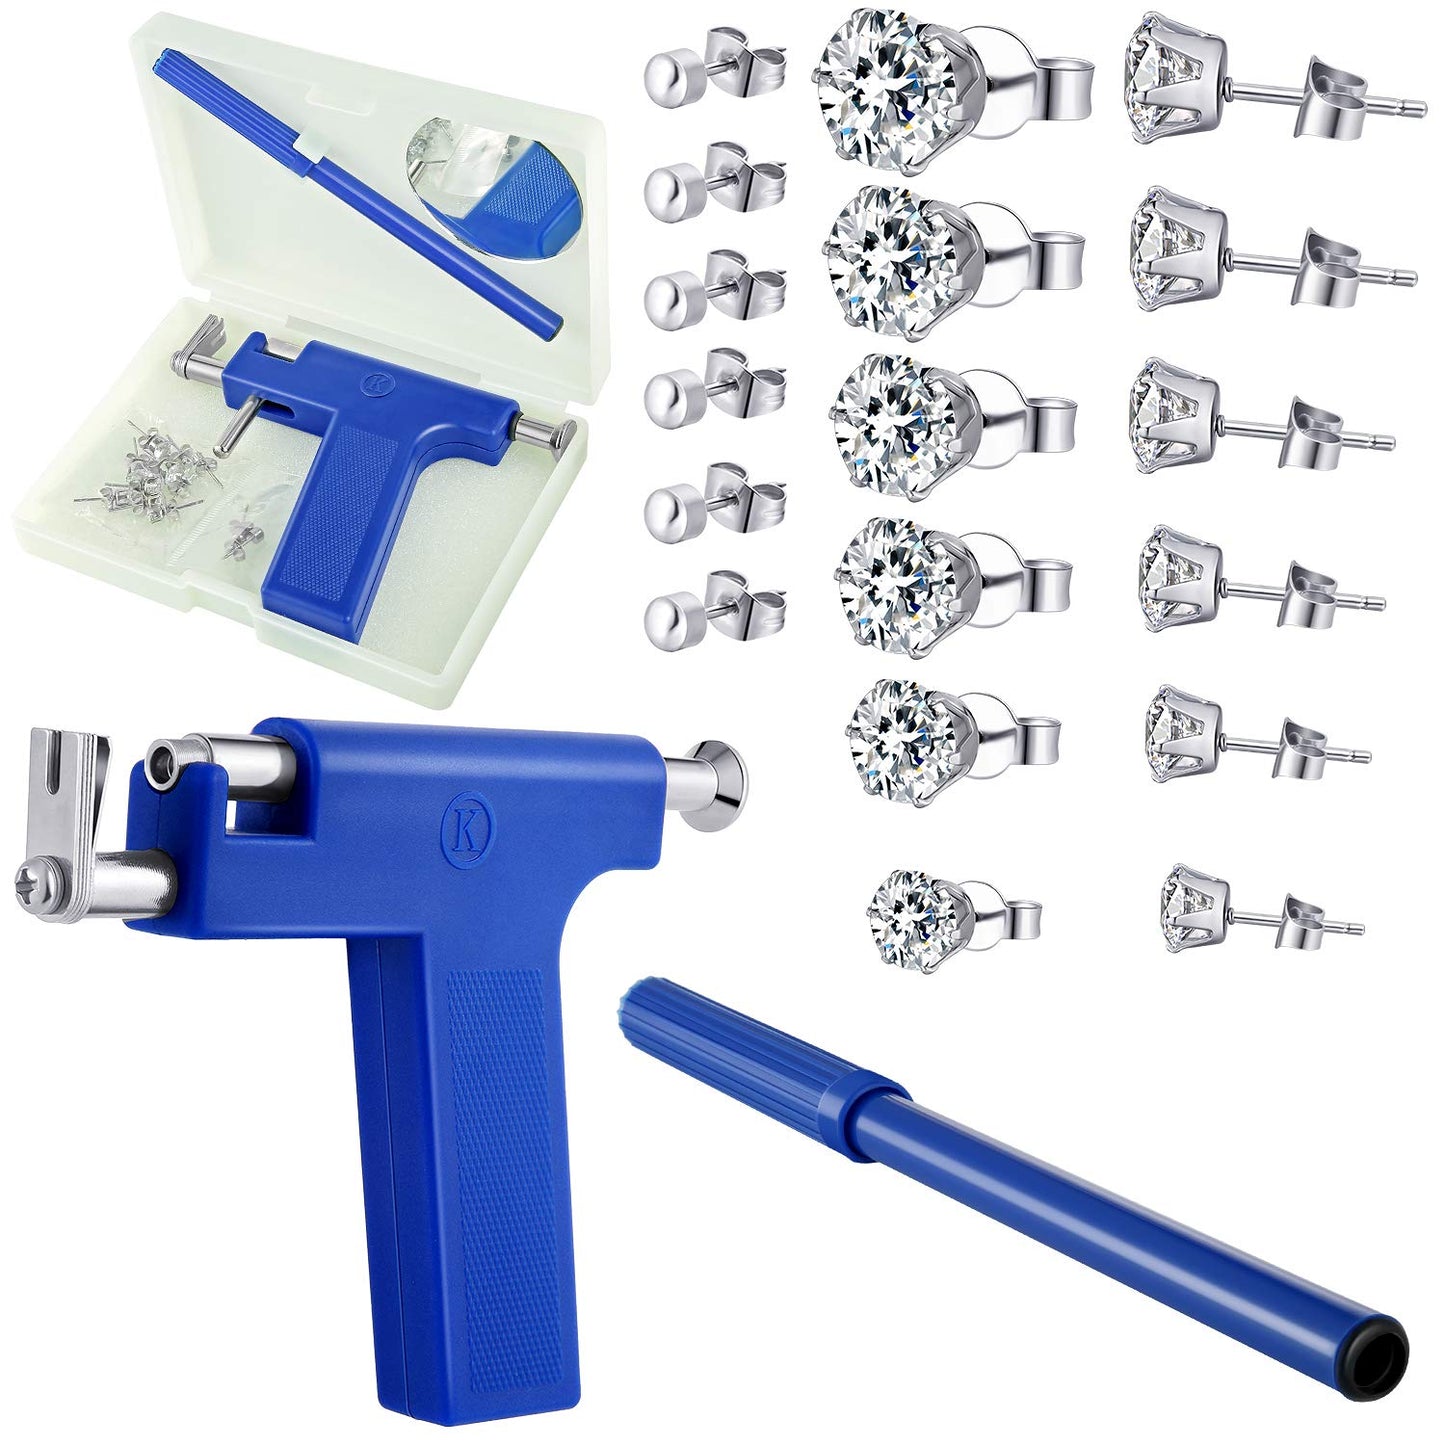 MFW Stainless Steel Body Ear Piercing Tool Set Ear Nose Navel Piercing Machines with 12 Pairs Stainless Steel Stud Earrings for Salon Home Use